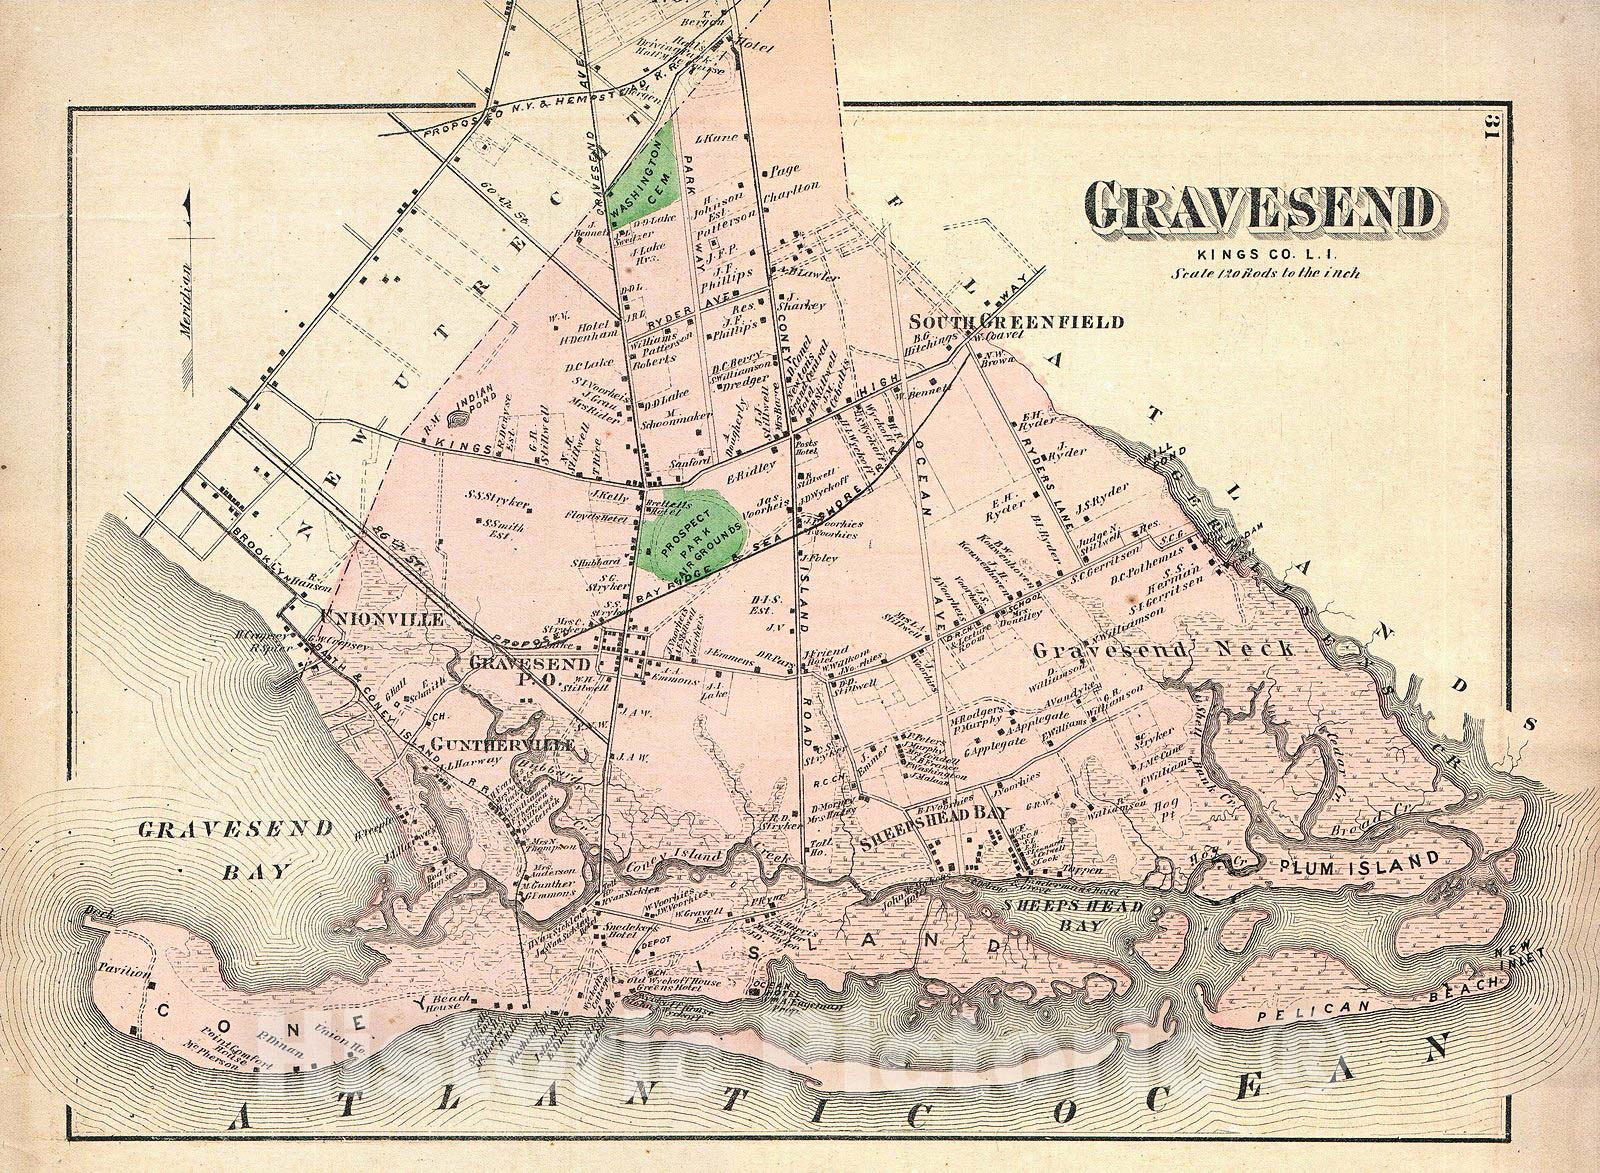 Historic Map : Beers Map of Gravesend, Brooklyn, New York City, Includes Coney Island, 1873, Vintage Wall Art